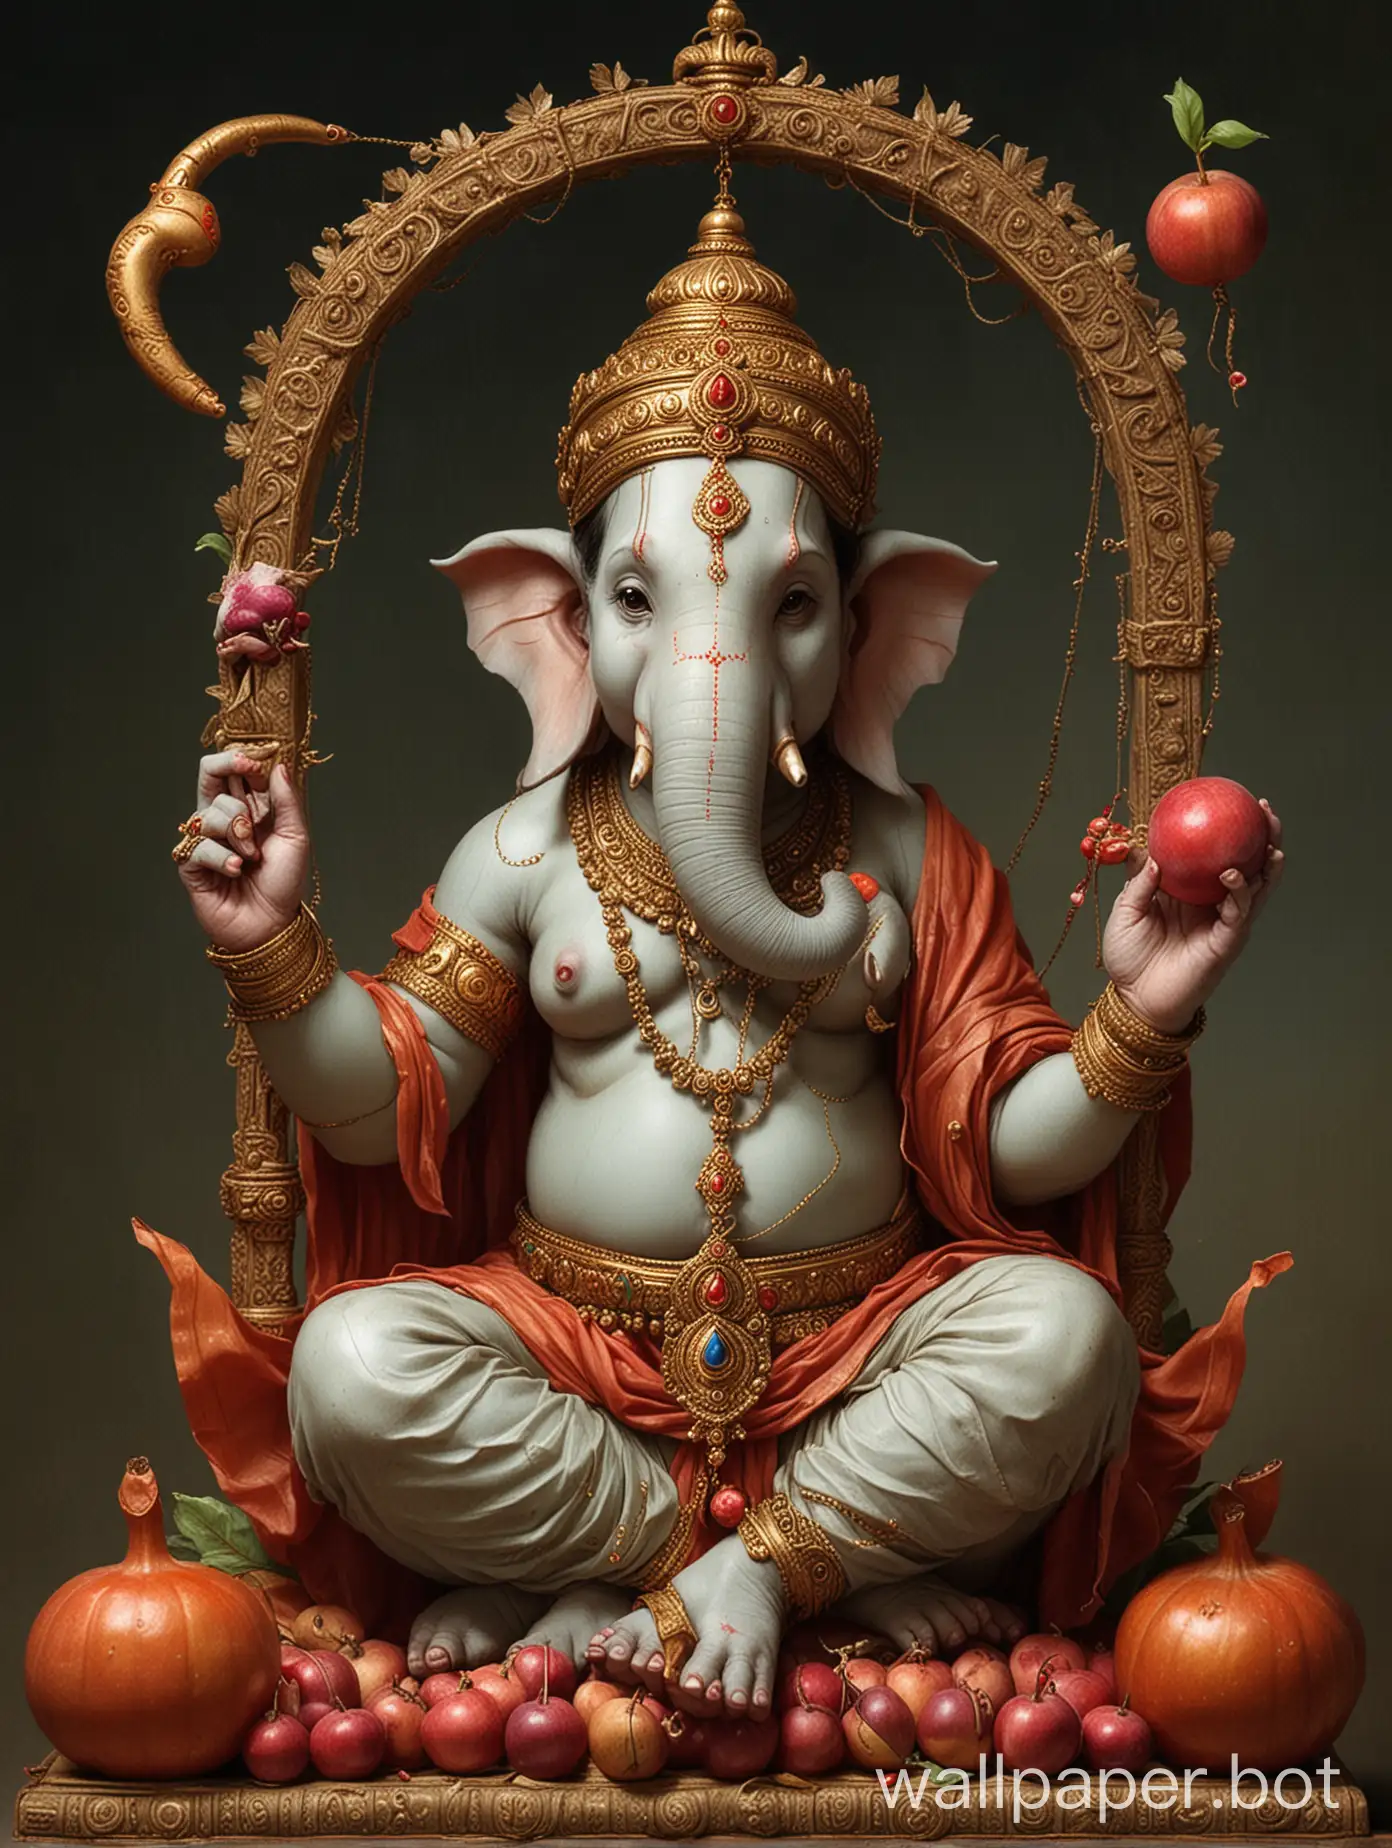 Ekakshara means a single syllable, in this Ganesha is ornated with a crescent moon and is having a third eye on his forehead. The single syllable is derived from the pronominal sound of “OM,” which is the seed letter “Gam.” He is seated atop his vehicle, the Mooshika, in the lotus position. He holds a pomegranate, an elephant goad, and a noose in one hand while bestowing boons with the others.